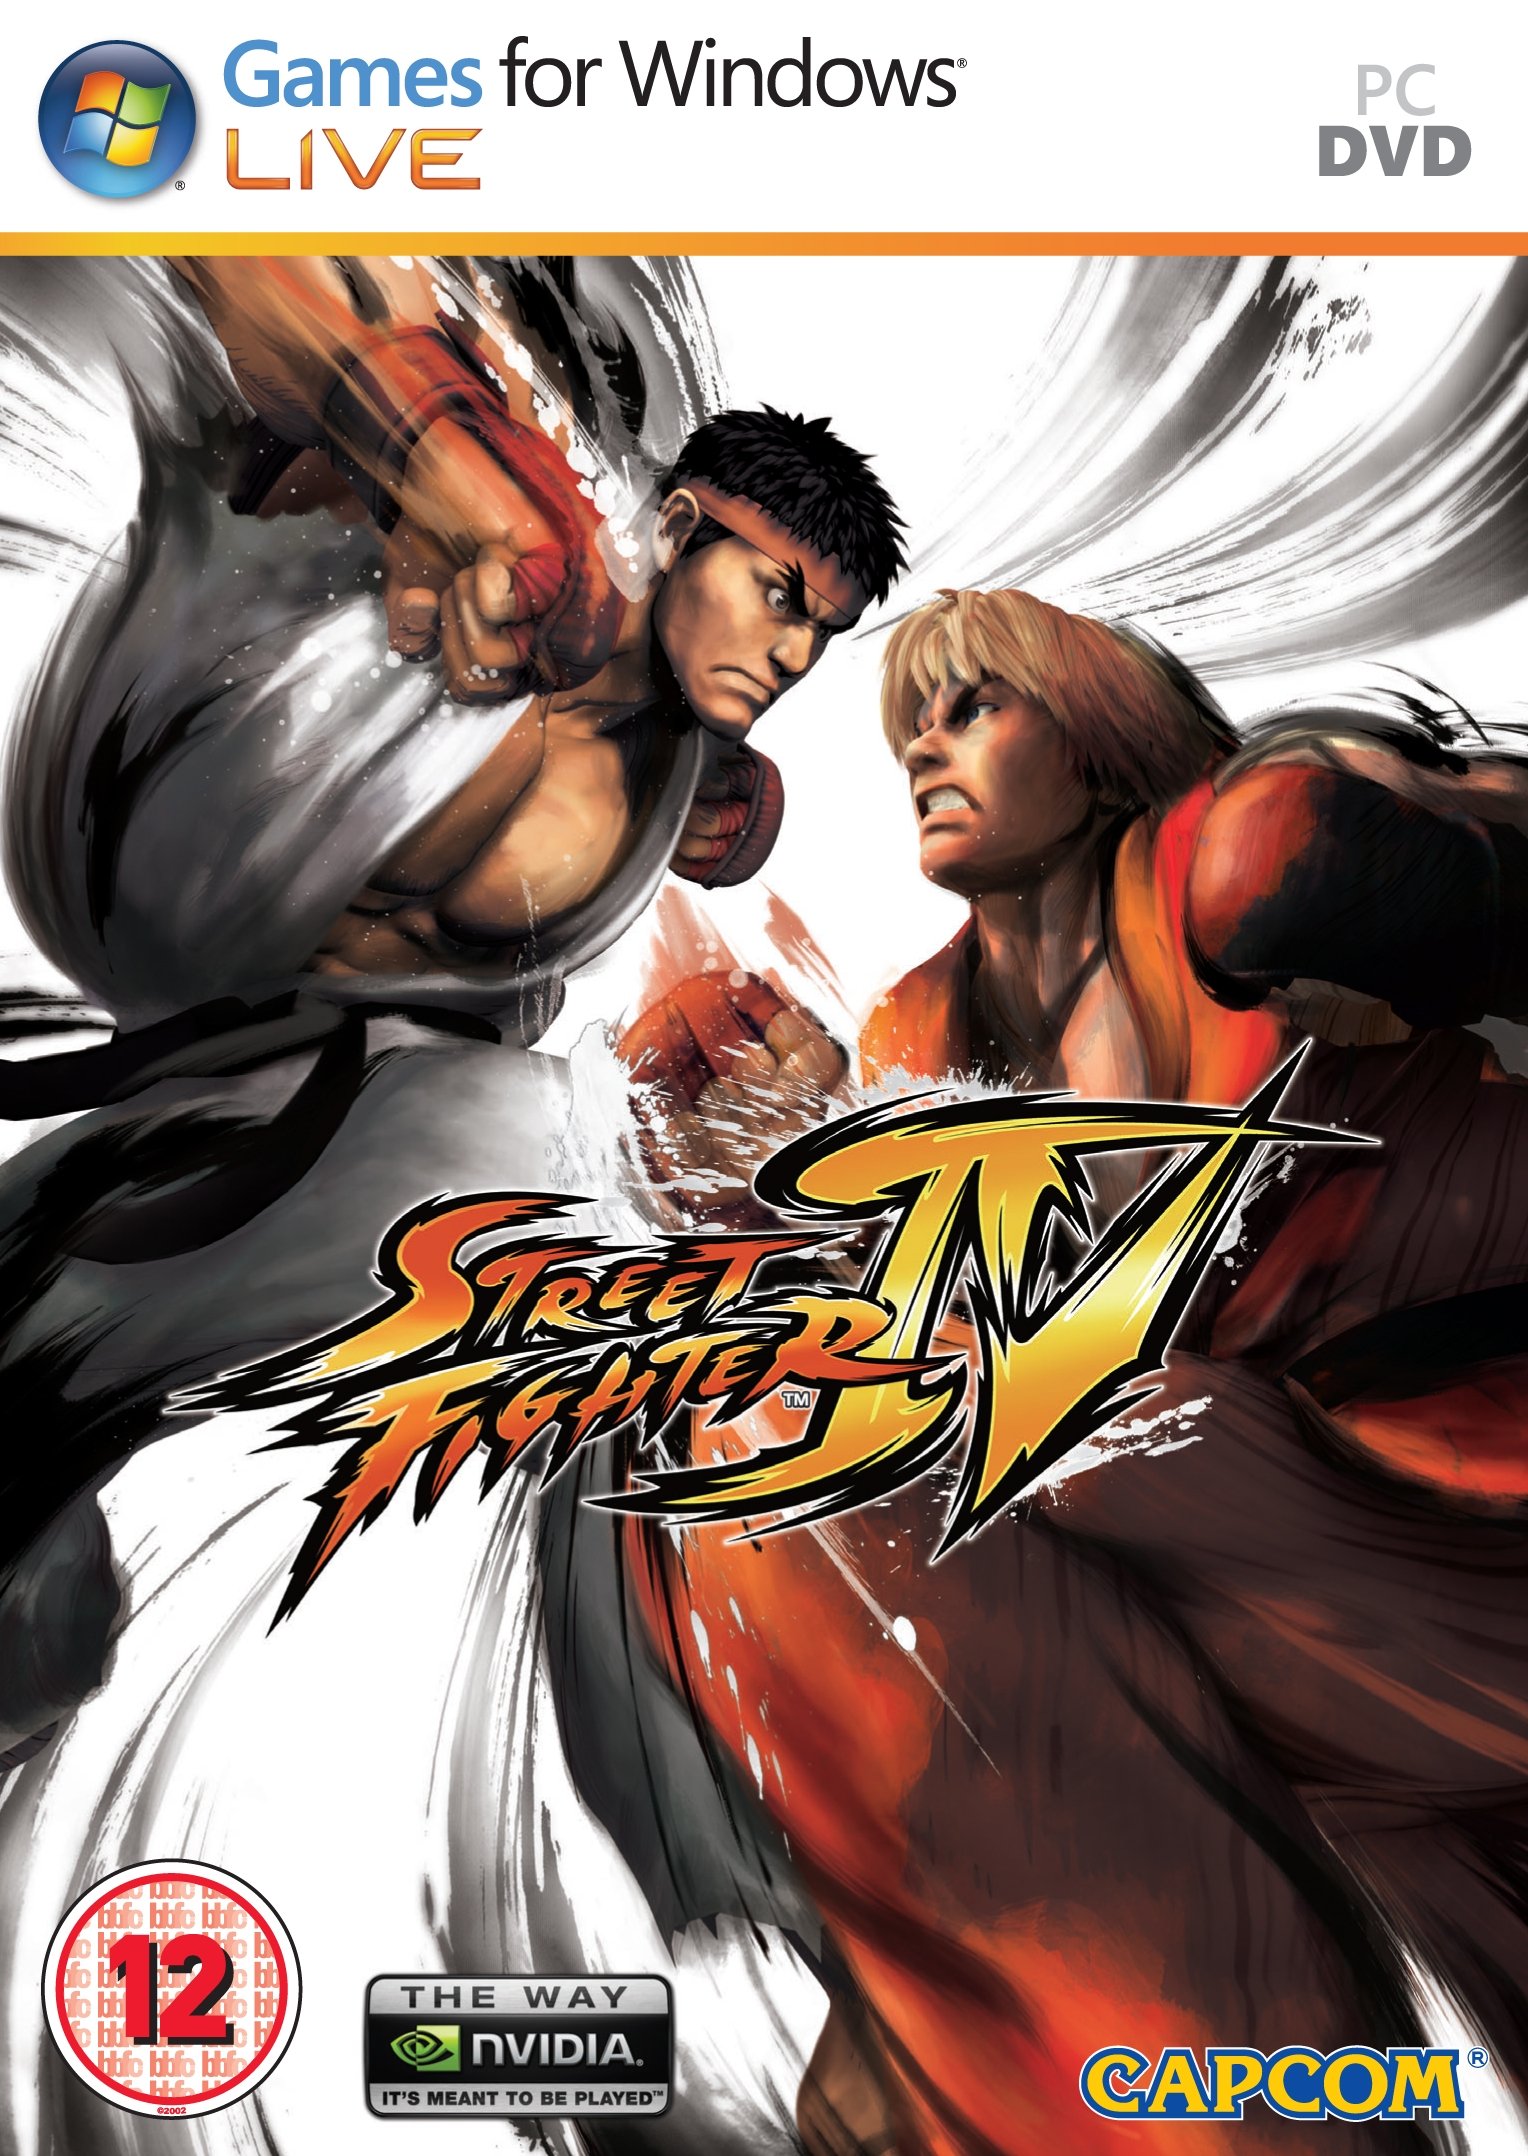 street fighter 6 year 1 ultimate pass